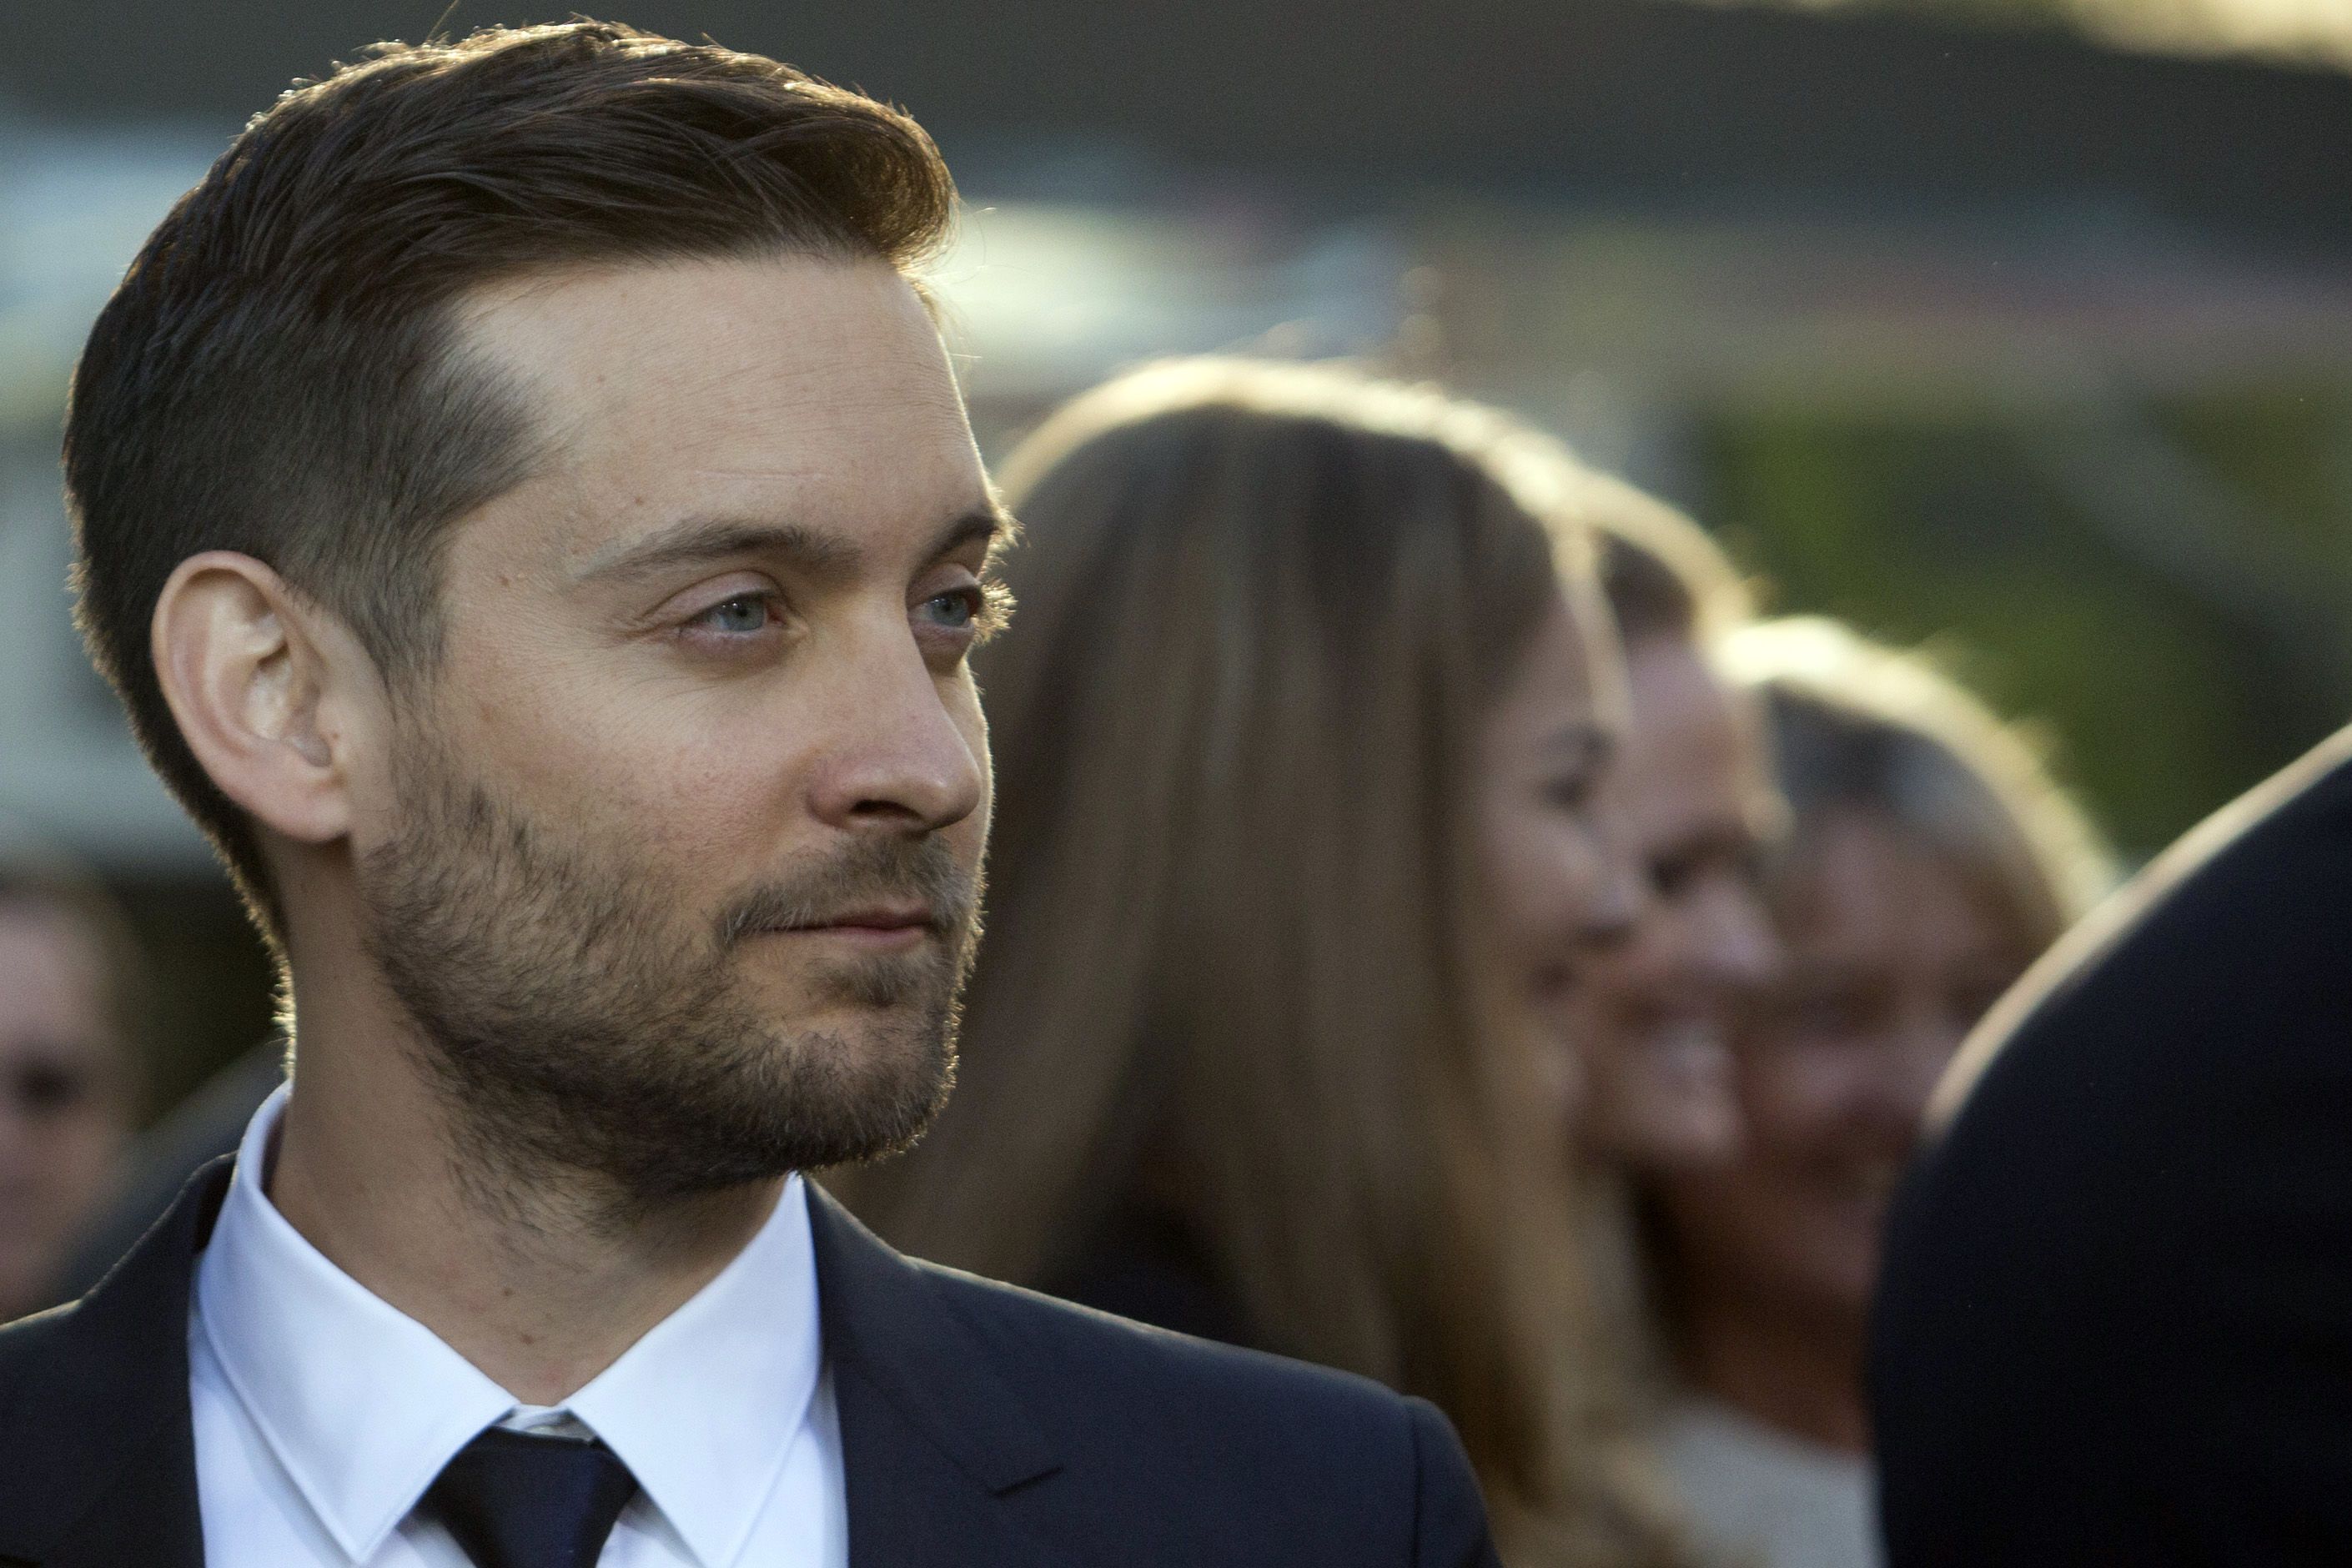 actor, celebrity, tobey maguire, american, face